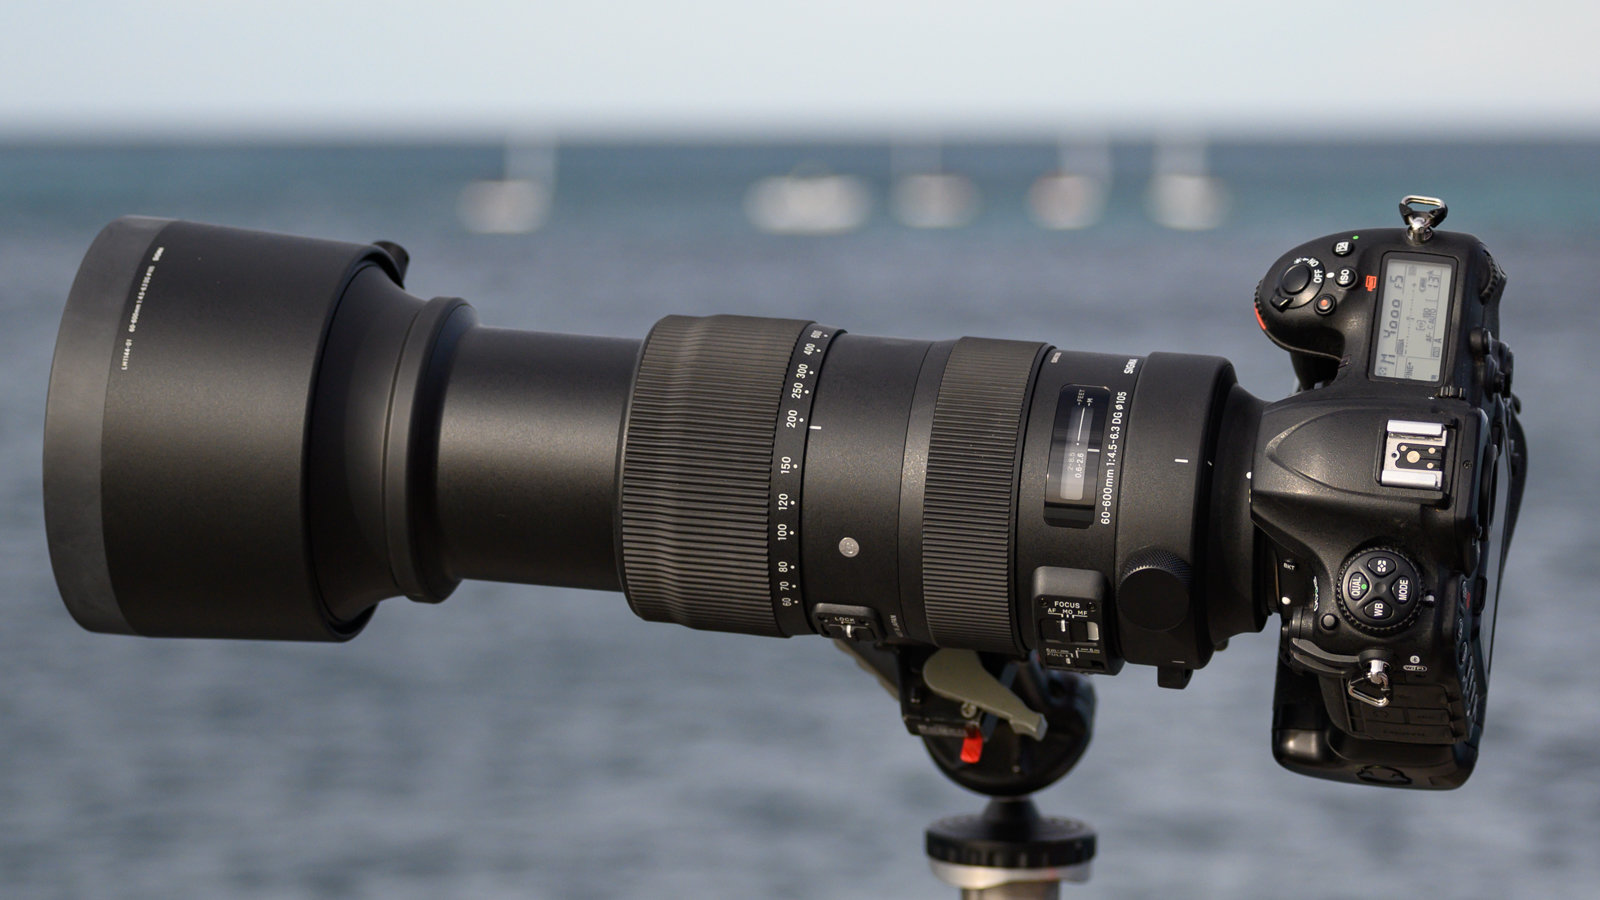 More information about "Sigma 60-600mm f/4,5-6,3 Sports DG OS"